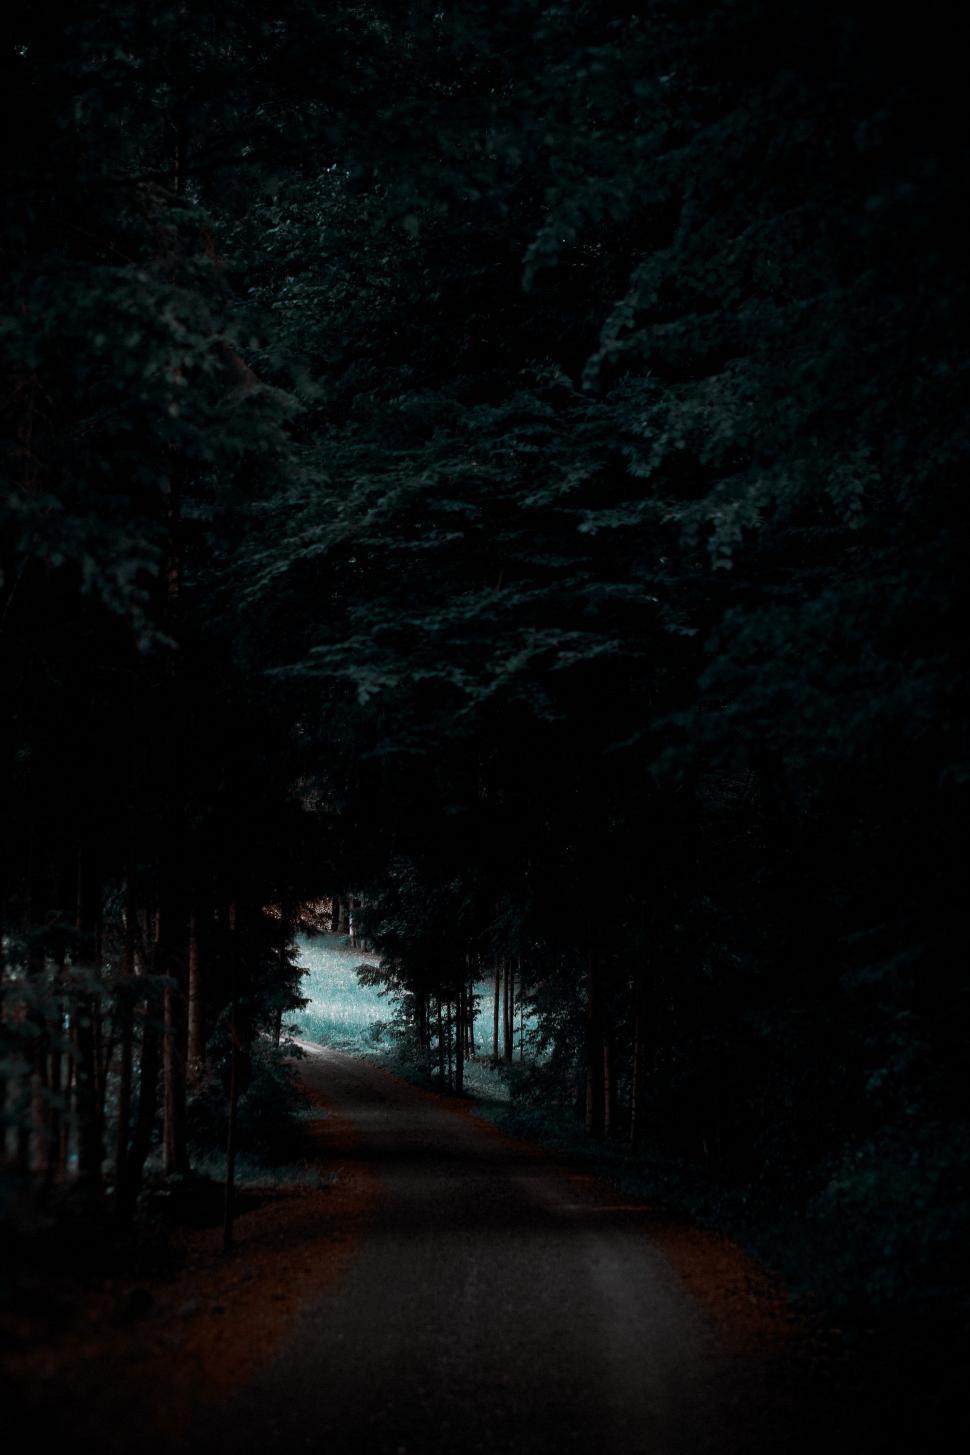 Free Image of Dark Road Flanked by Trees 